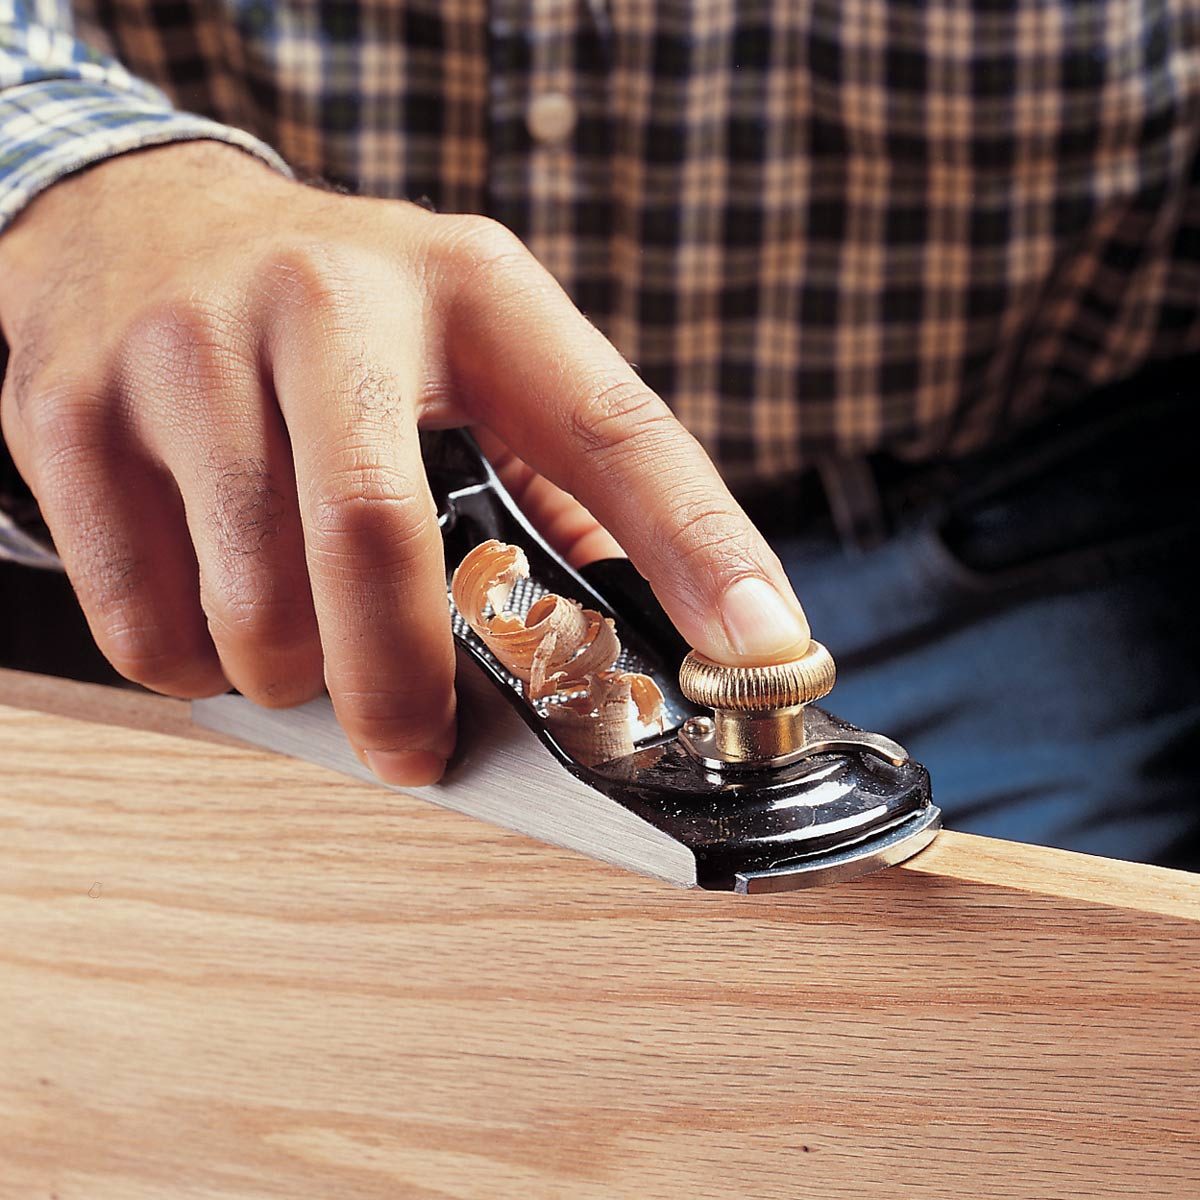 10 Woodworking Basics You Should've Learned in Shop Class